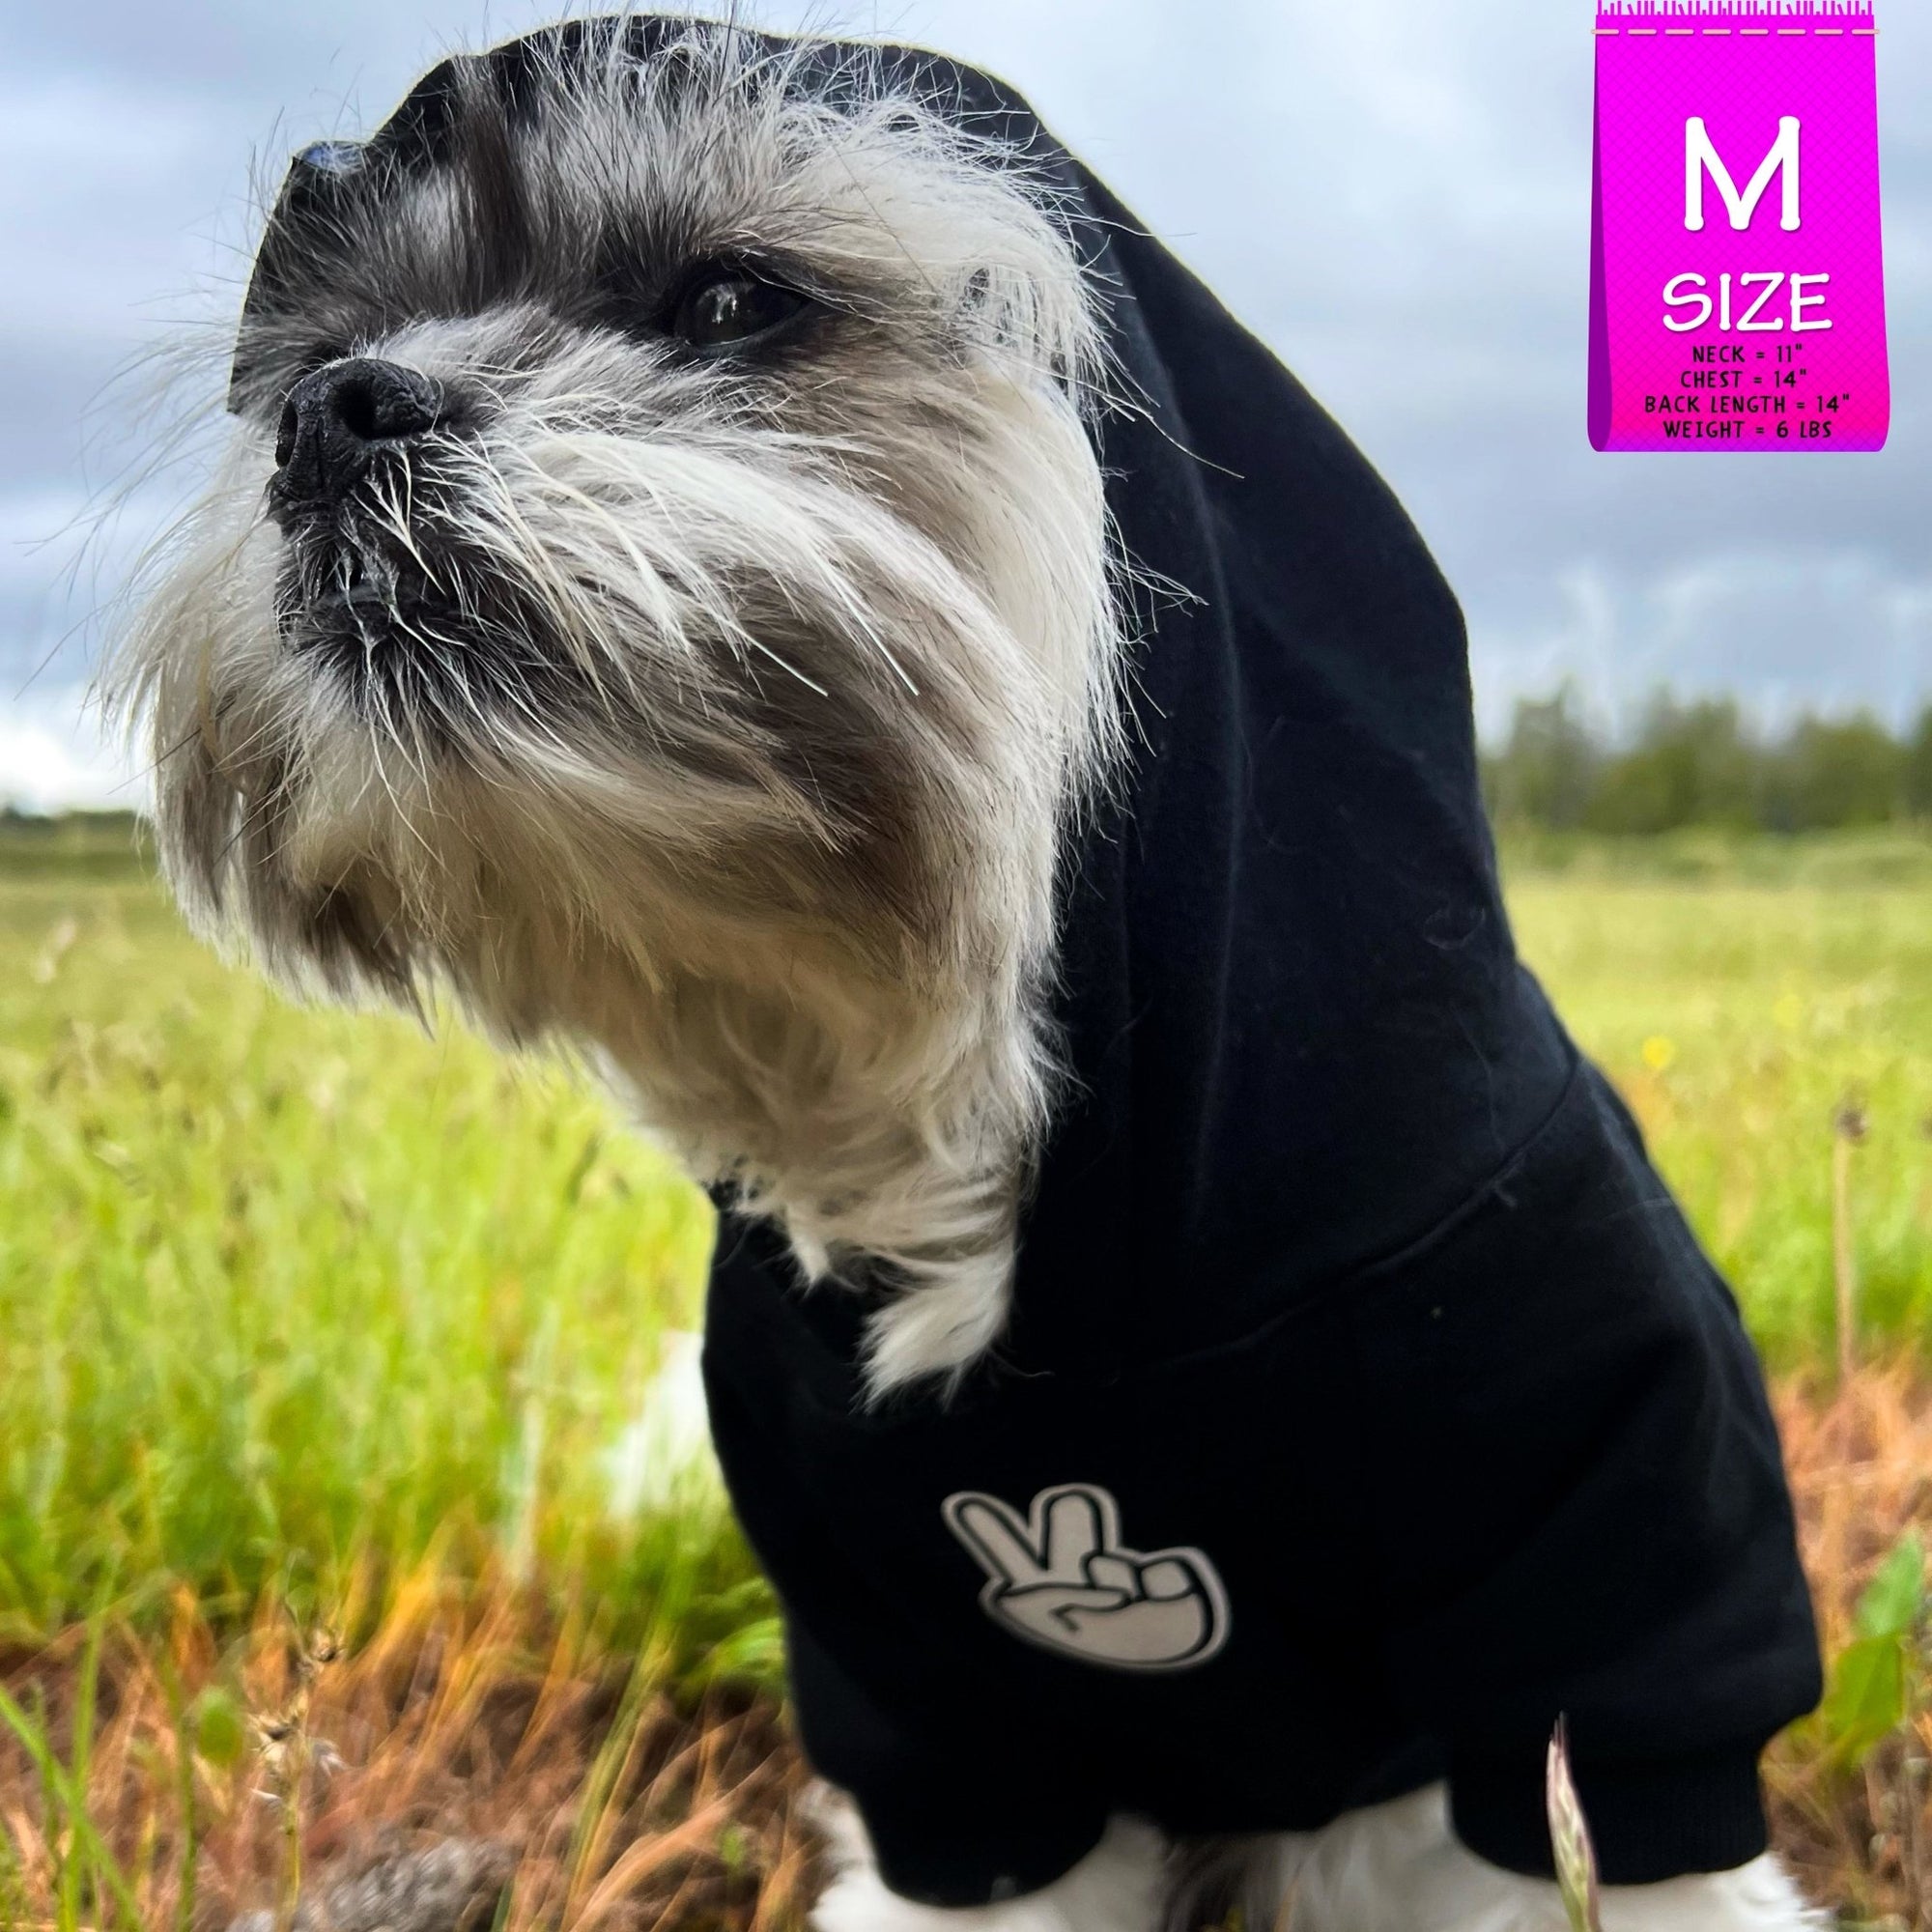 Dog Hoodie - Hoodies For Dogs - Shih Tzu mix wearing &quot;Good Life&quot; dog hoodie in black with hood on - front view - with white finger peace sign emoji on front - sitting outdoors in a grassy field - Wag Trendz